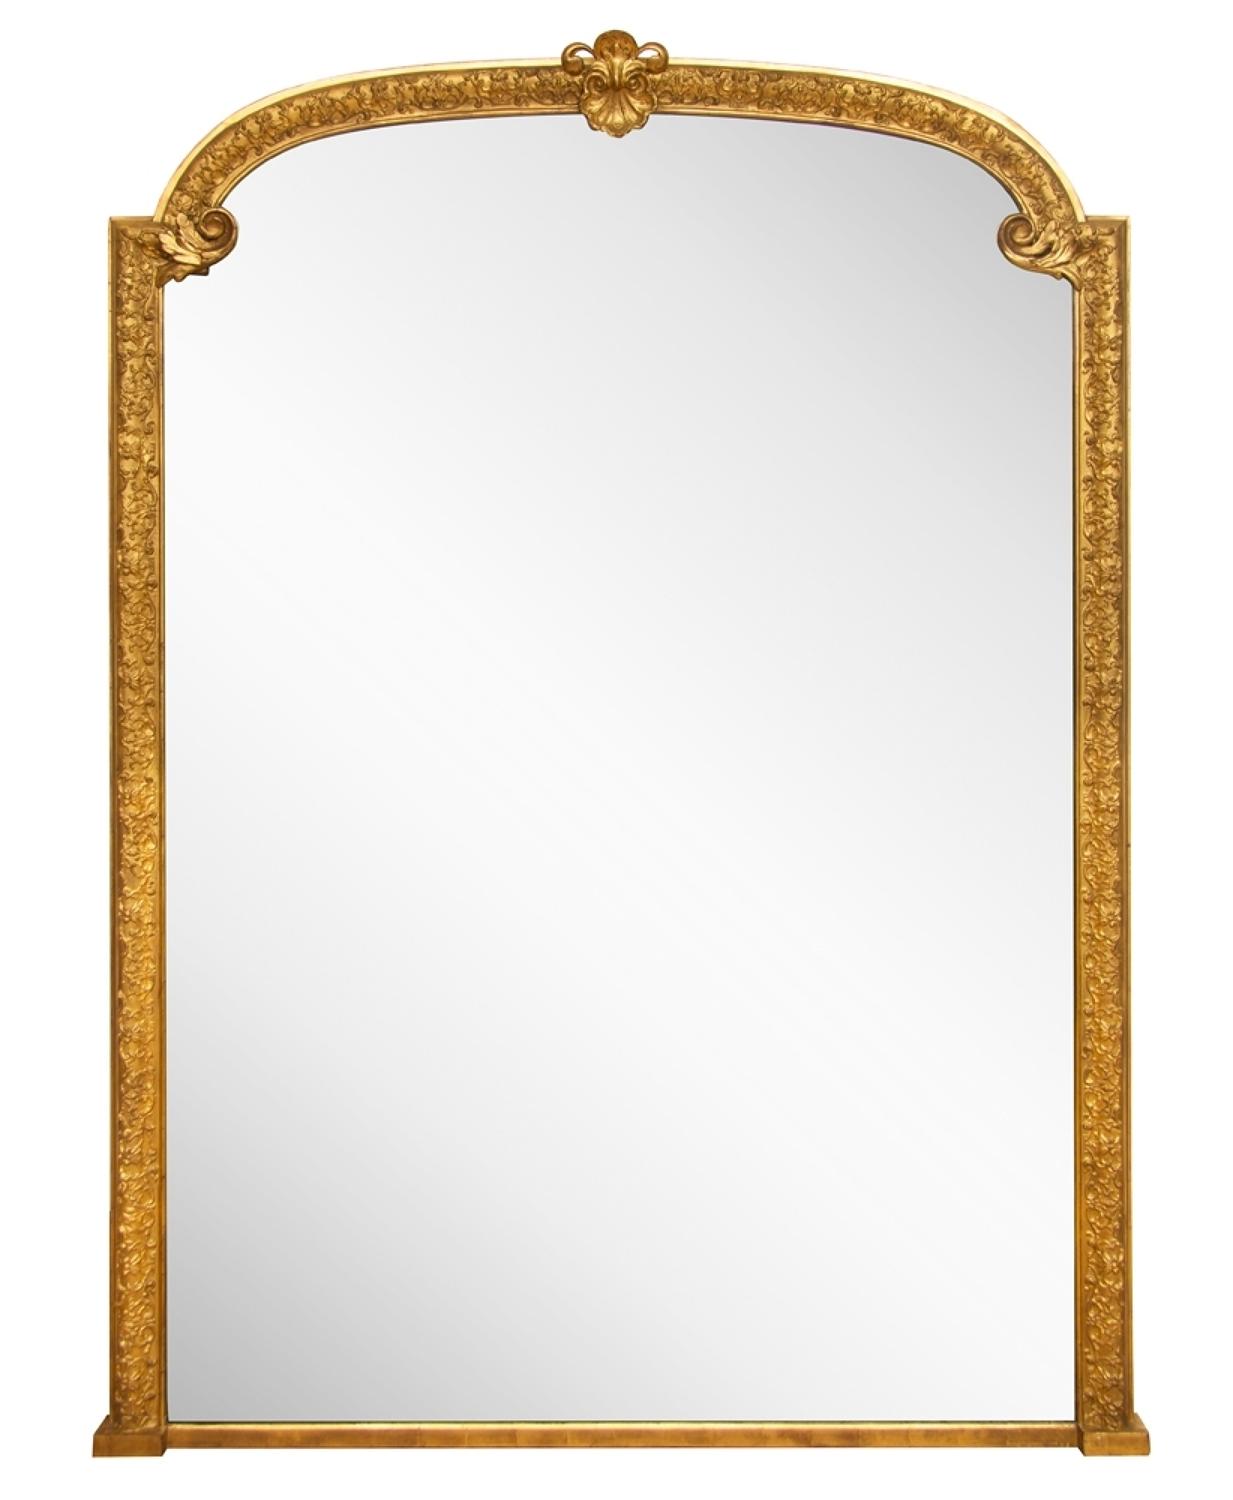 A large Antique gilded overmantle mirror